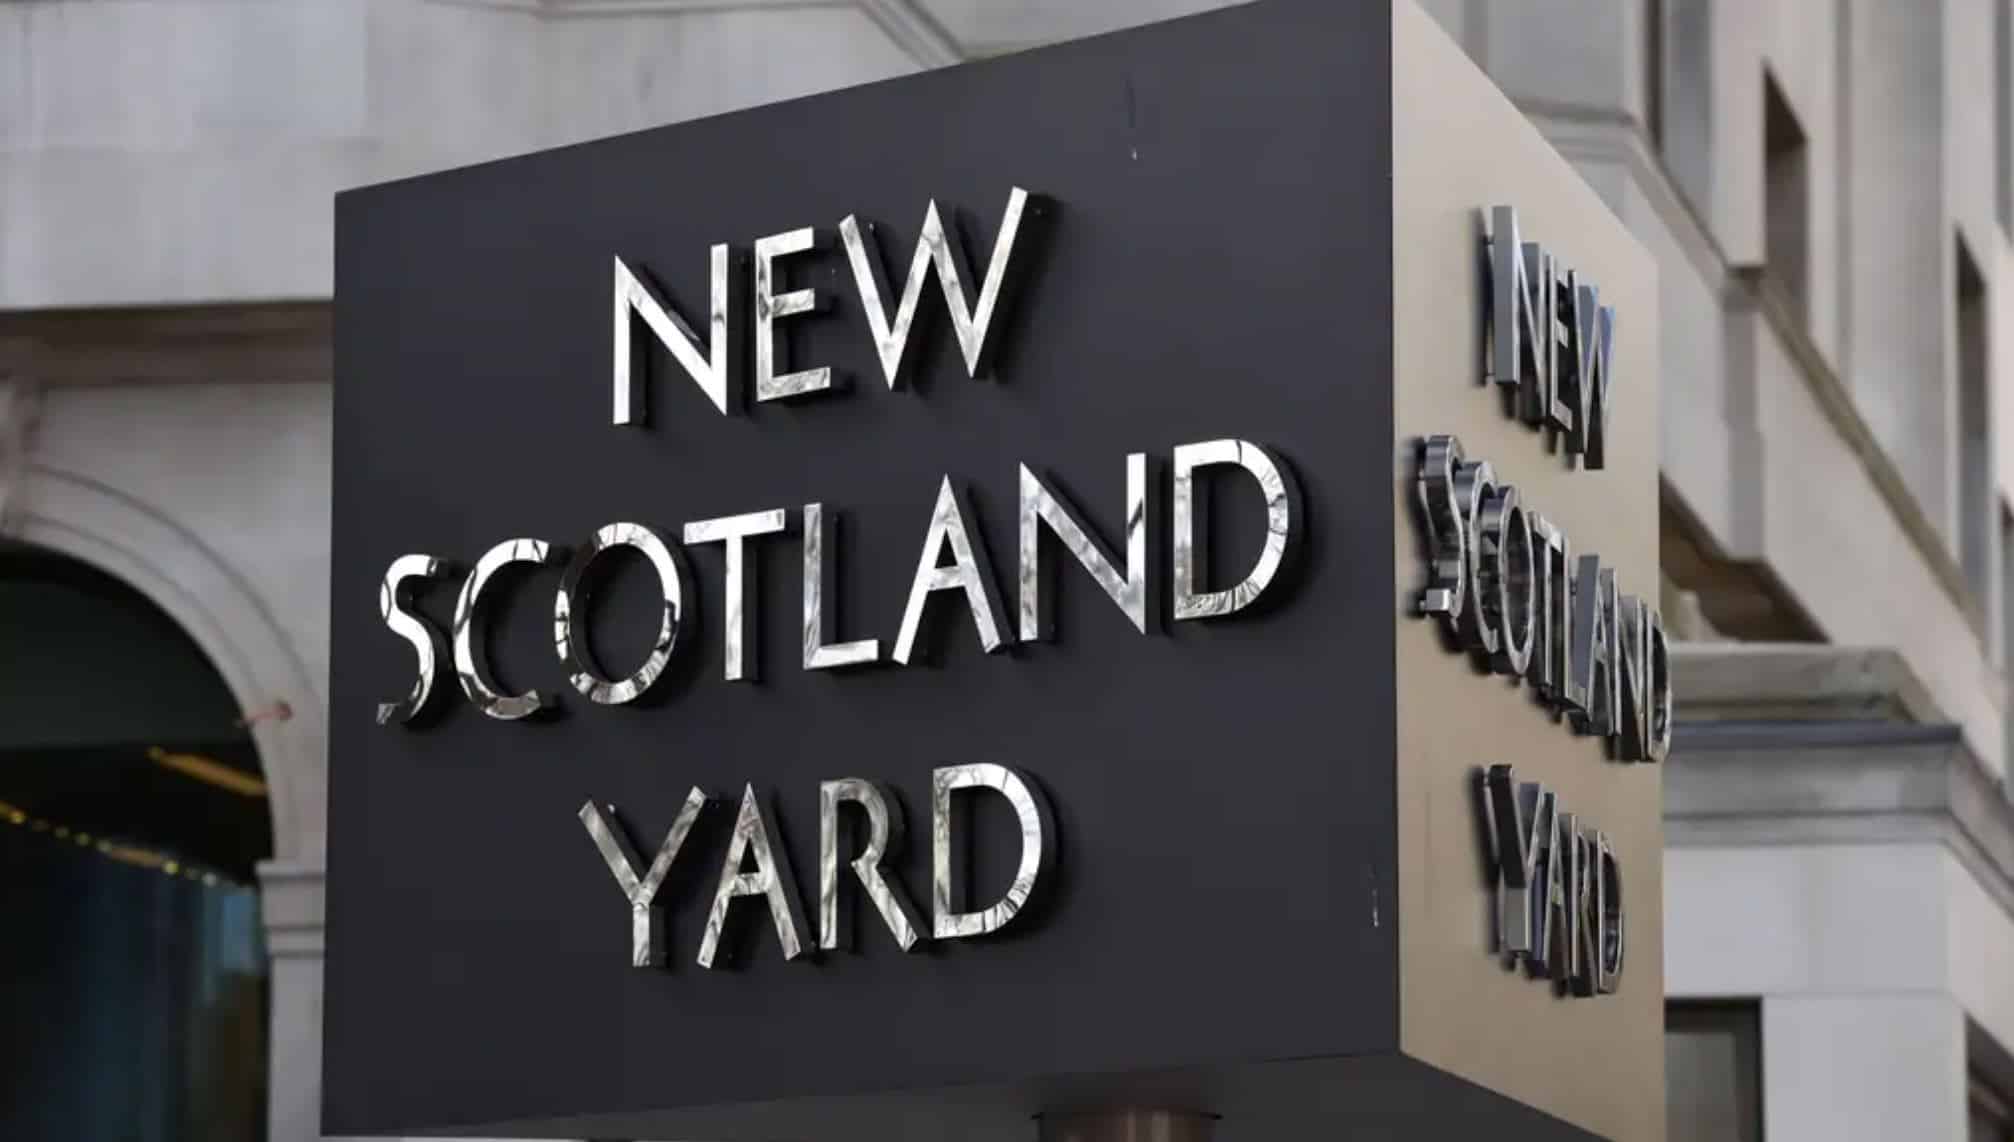 Met officers moved from serious crime squads to investigate internal standards